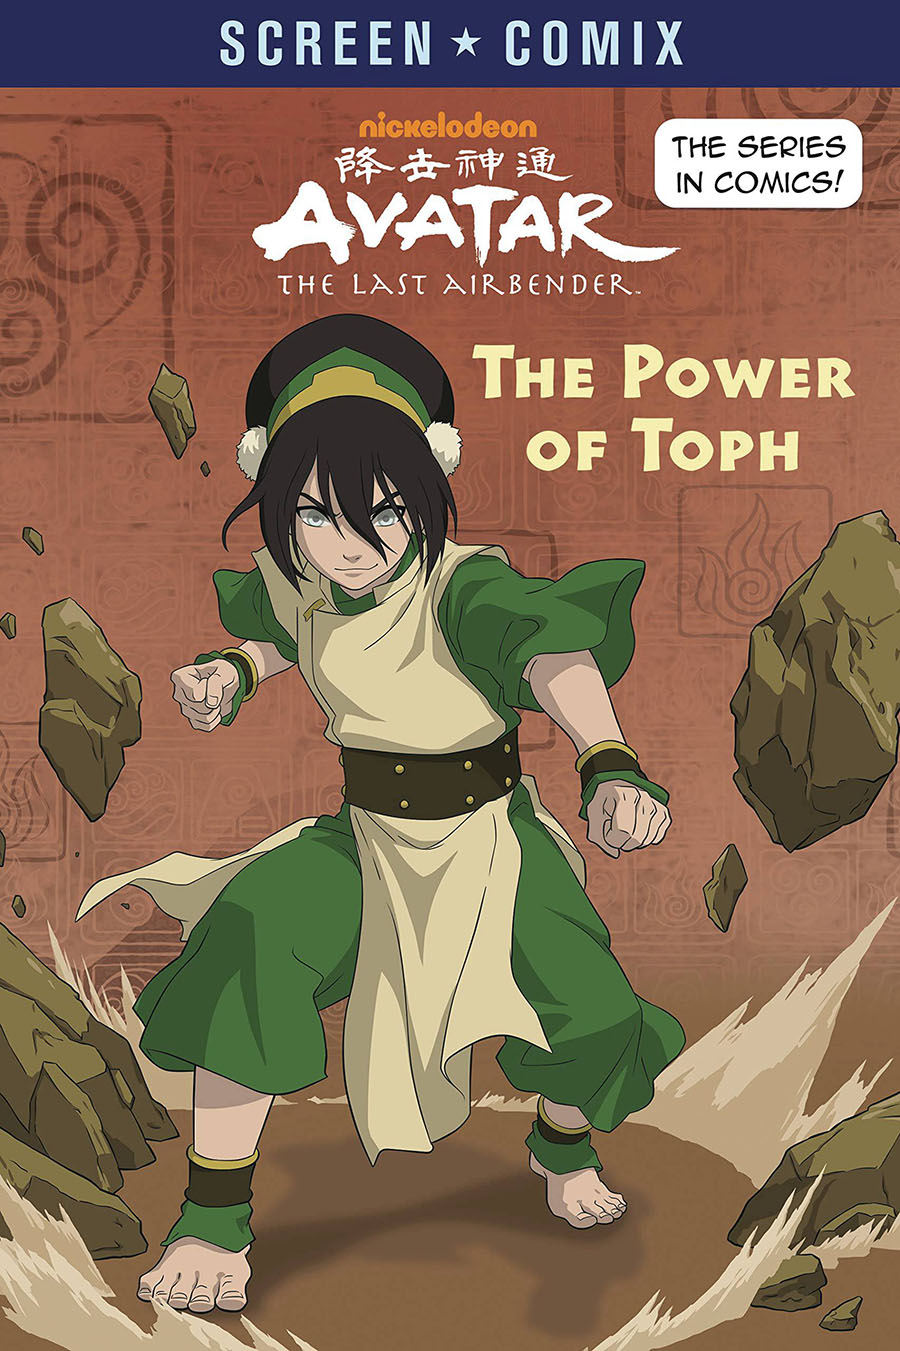 Avatar The Last Airbender Screen Comix Power Of Toph TP